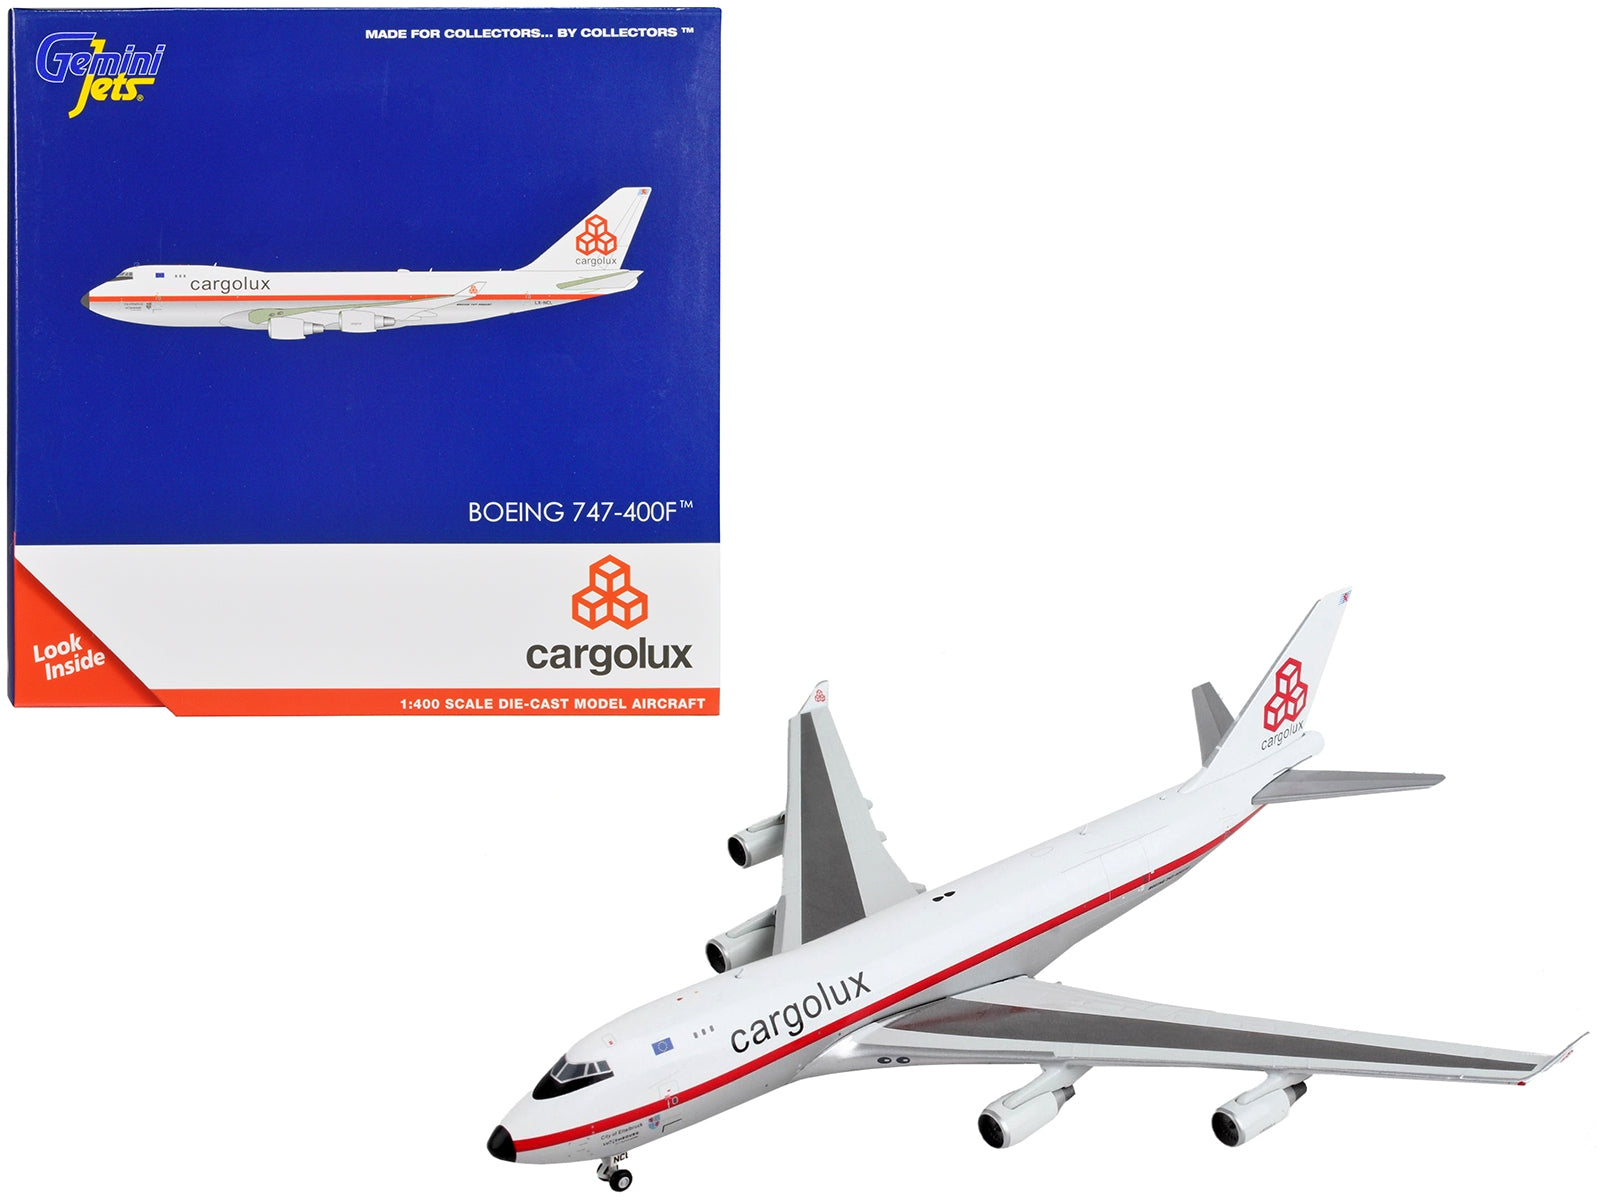 Boeing 747-400F Commercial Aircraft "Cargolux" White and Silver with Red Stripes 1/400 Diecast Model Airplane by GeminiJets